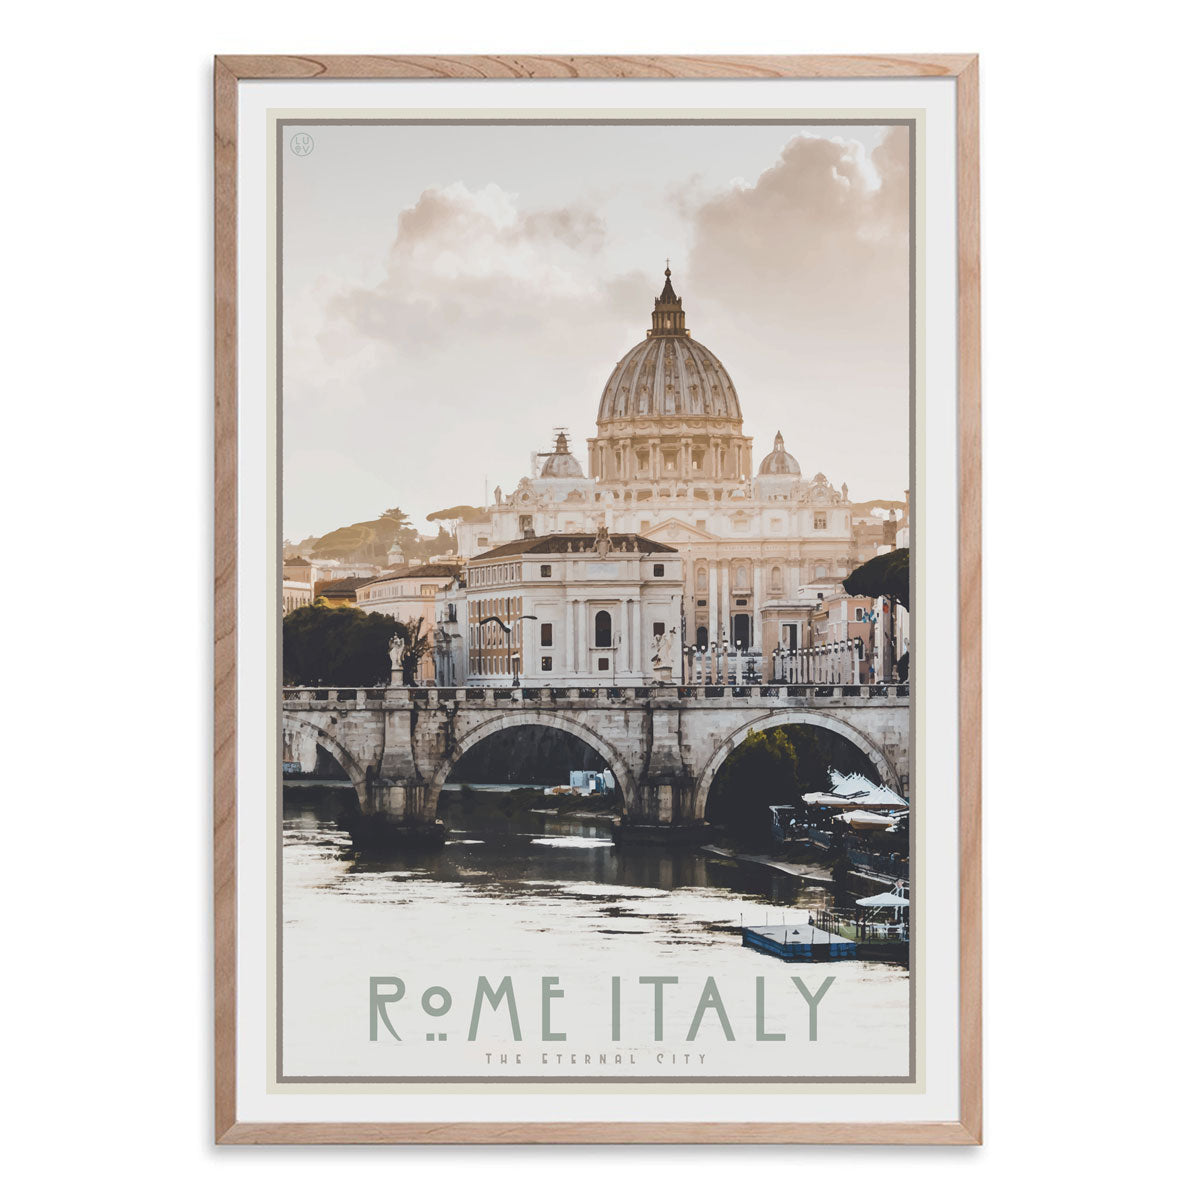 Rome Italy vintage travel style oak framed poster by places we luv